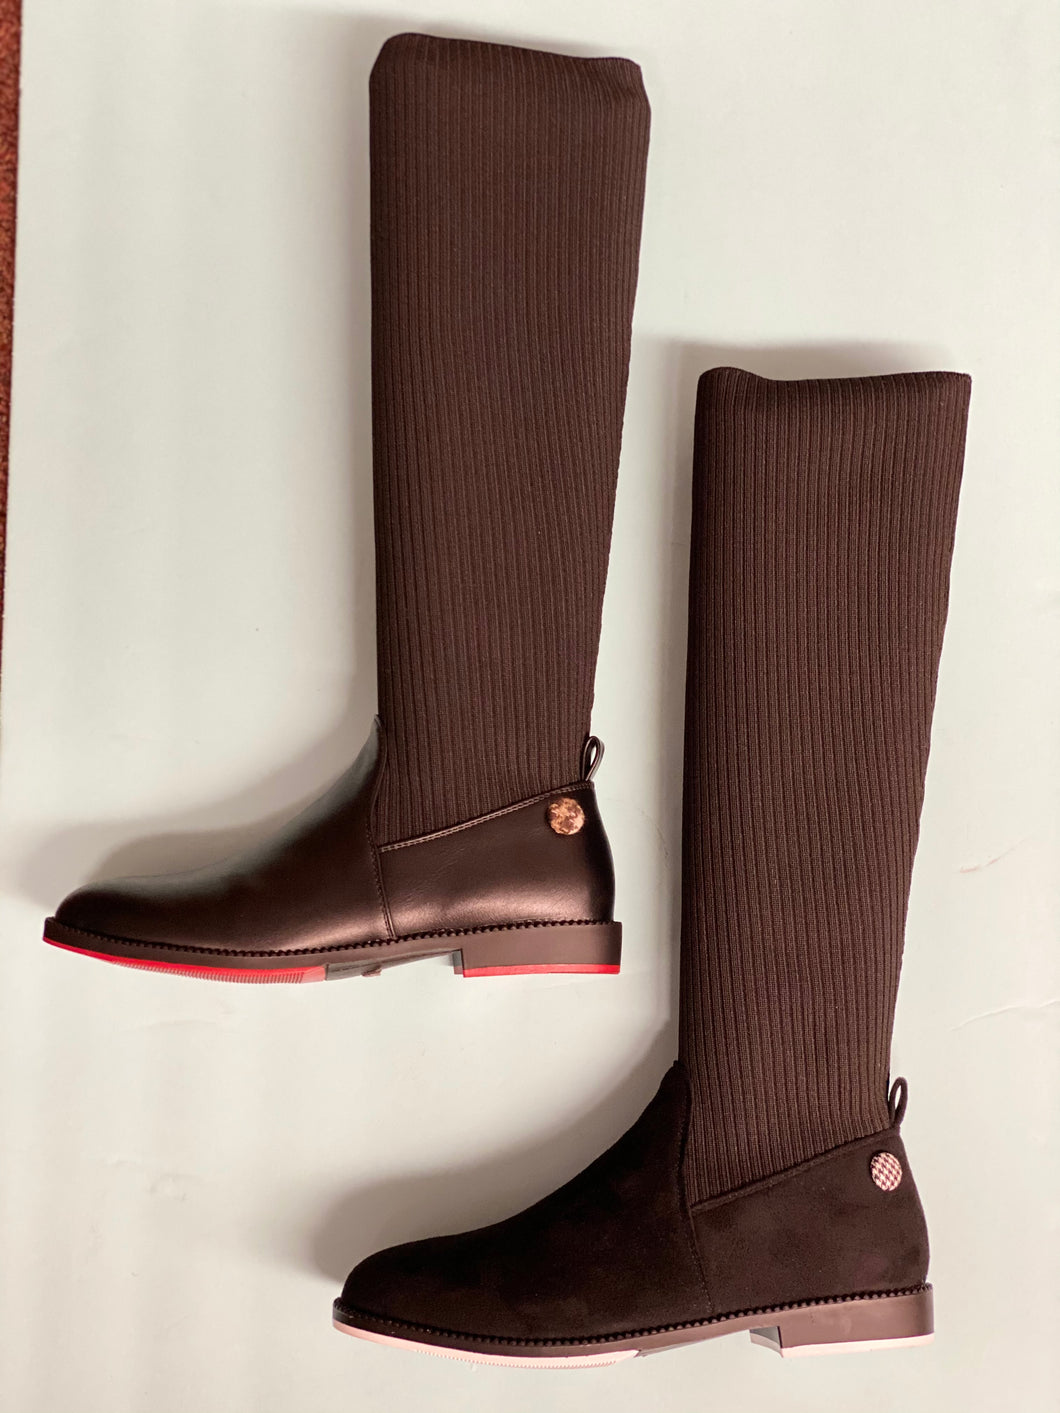 SALE Lolit F1300-1 Sock Stretch Boot with Red Sole